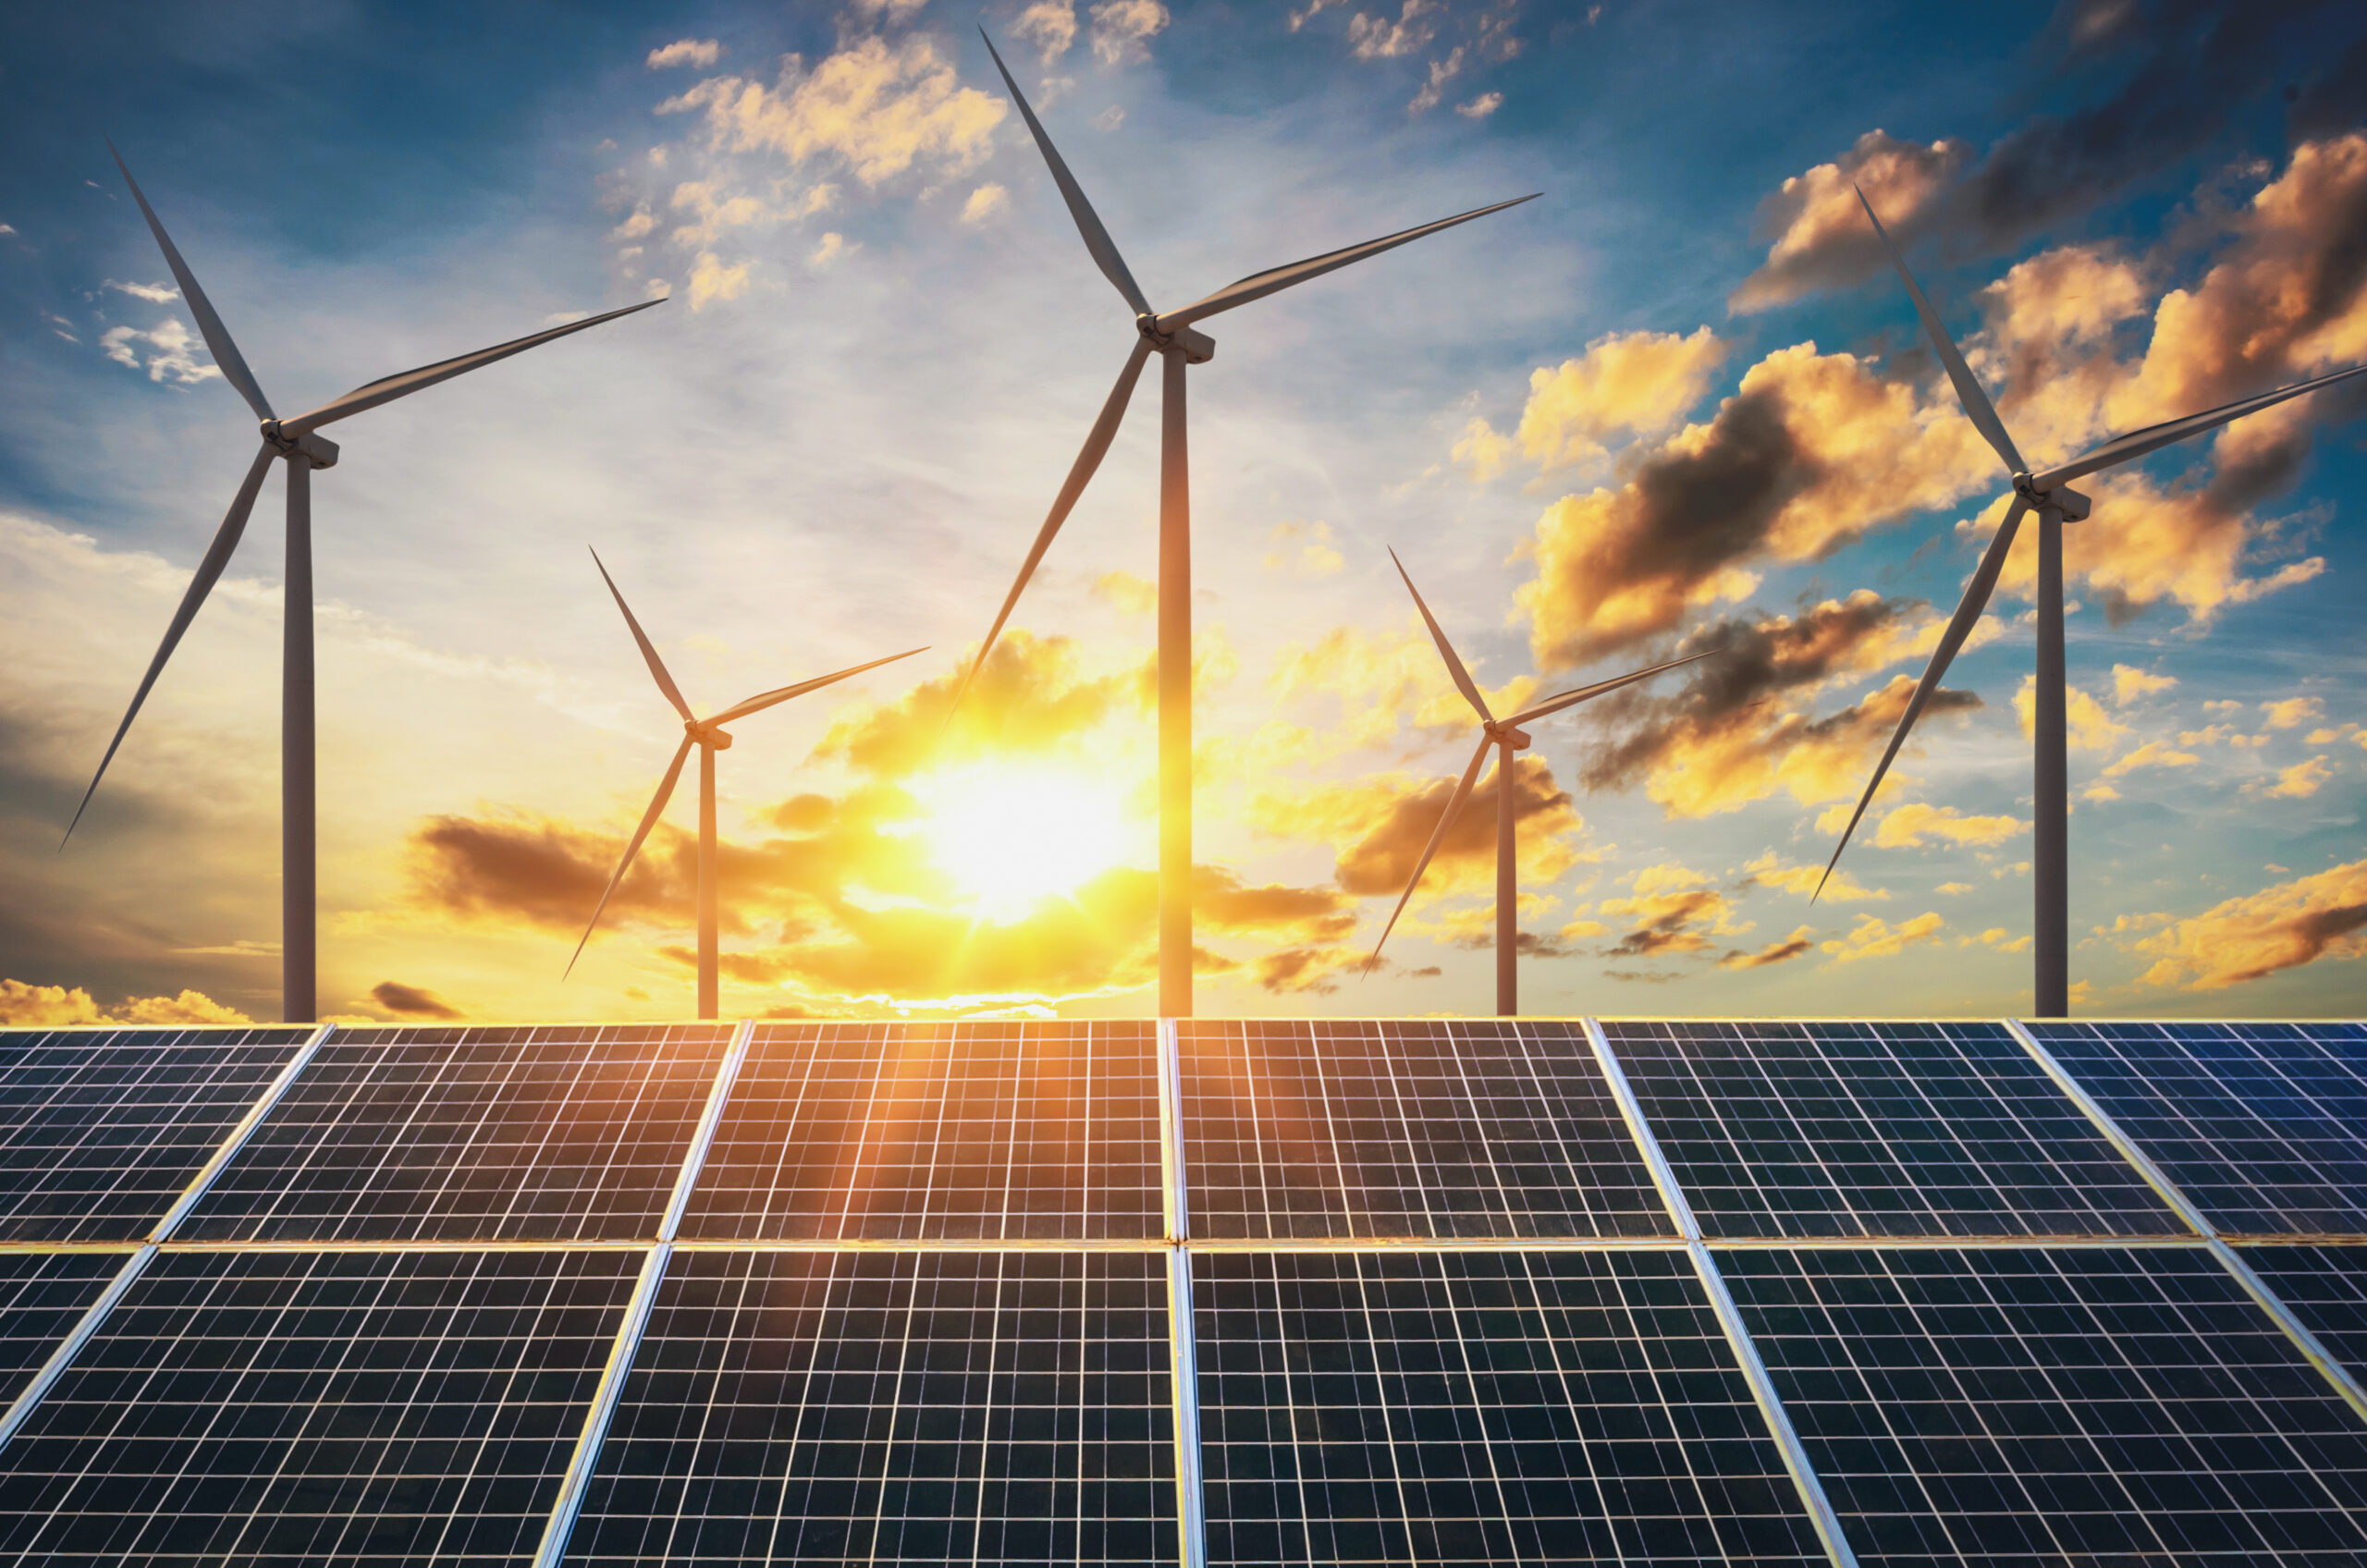 Investor Confidence in Renewables Continues Strong Growth